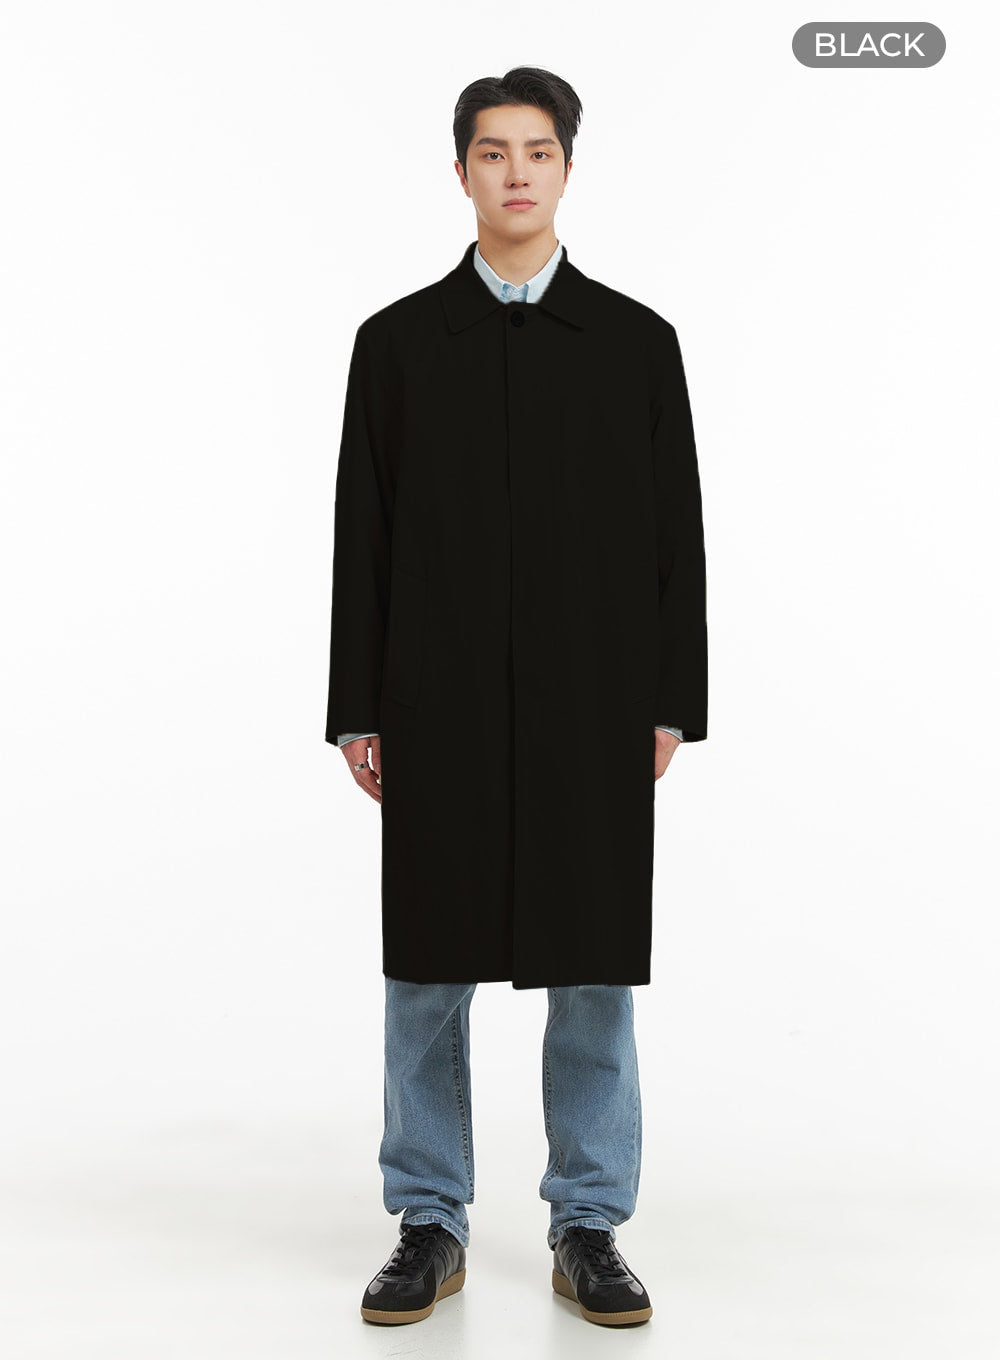 mens-solid-cotton-trench-coat-ia401 / Black